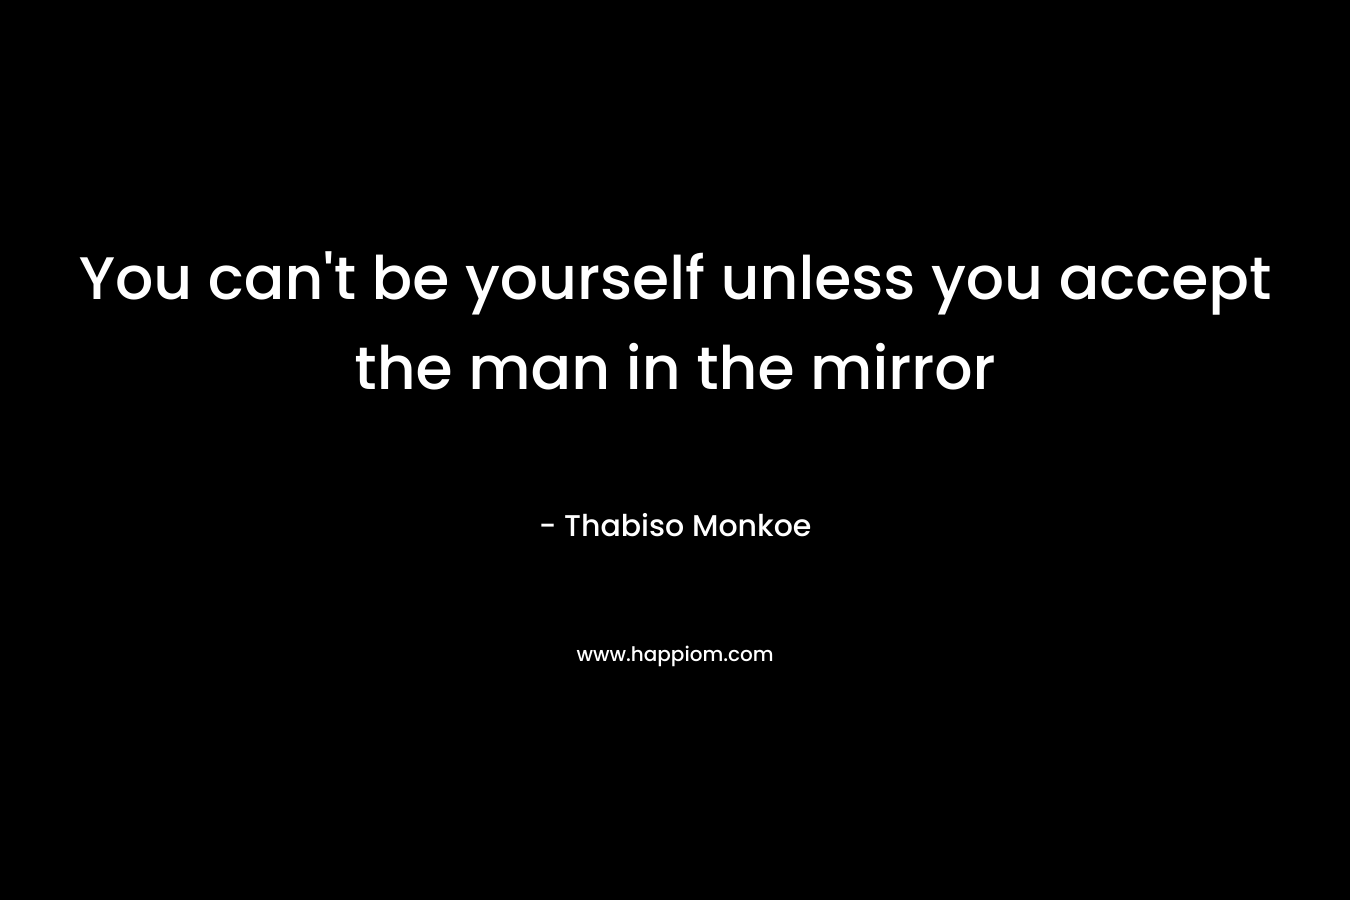 You can’t be yourself unless you accept the man in the mirror – Thabiso Monkoe